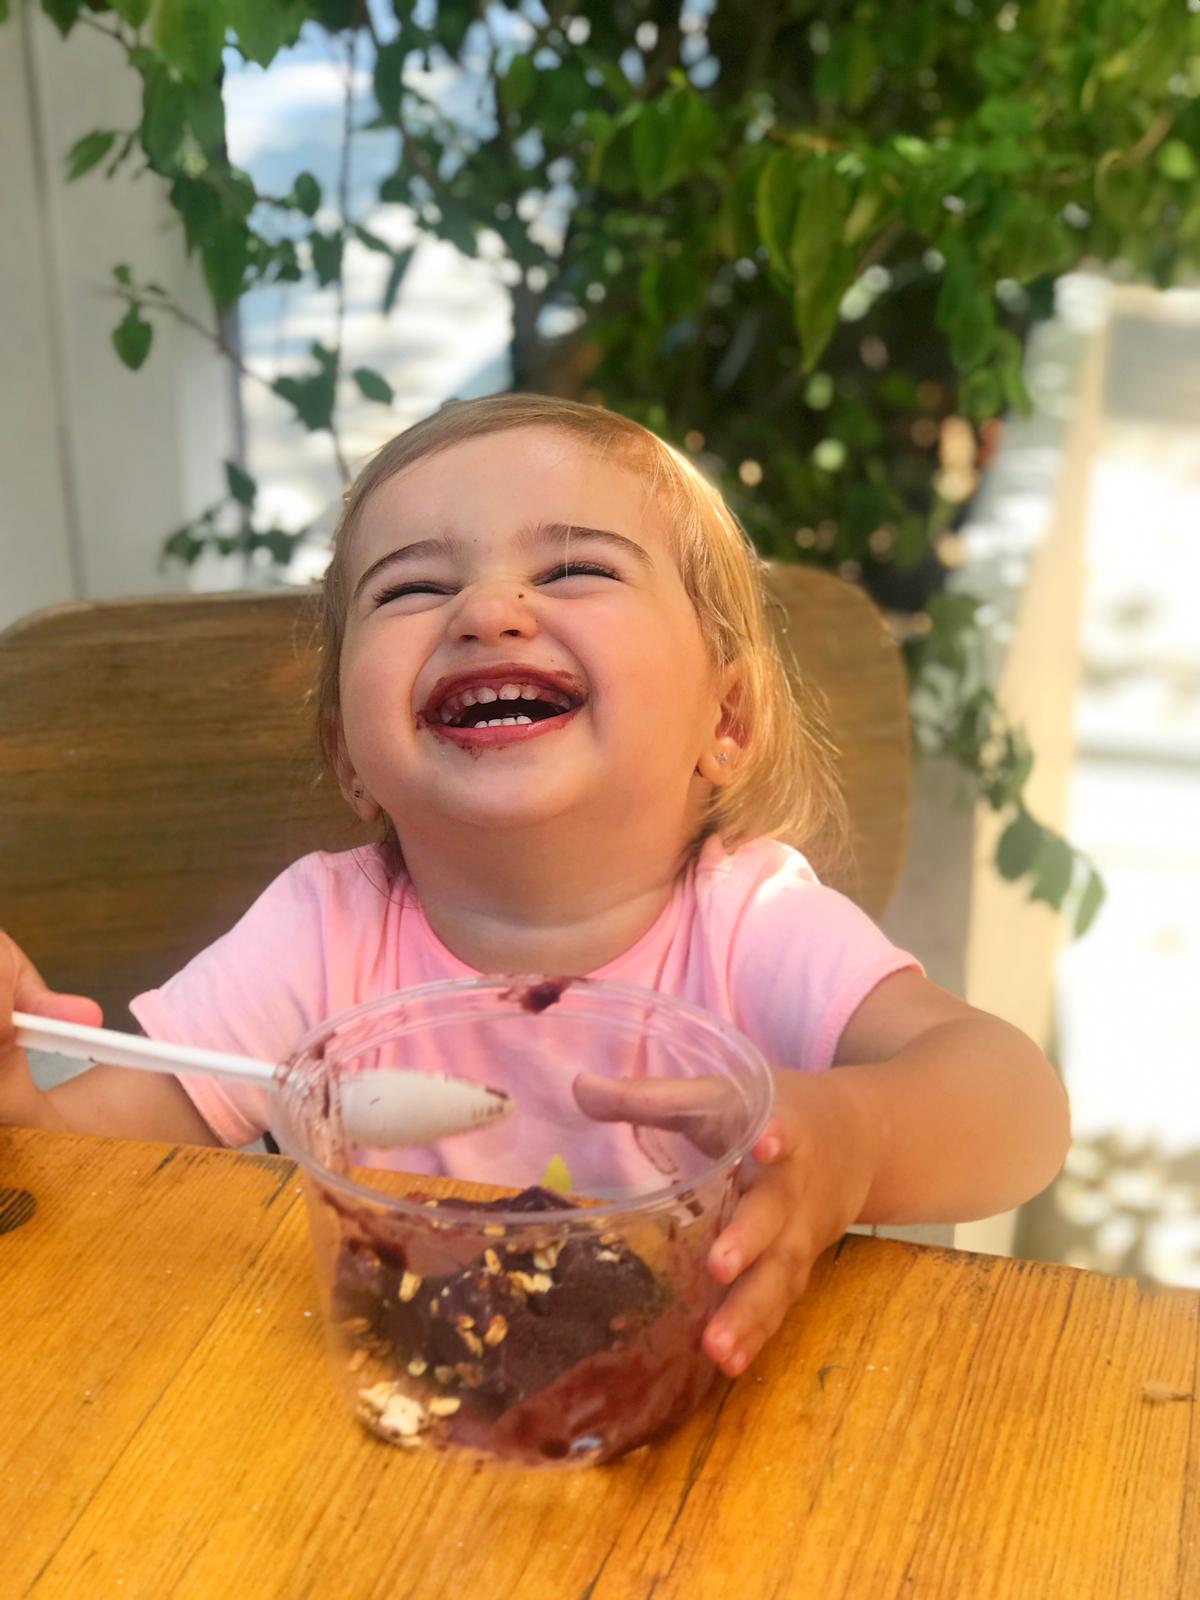 You will be surprised to see how happy your little one will be with an organic and sugar-free "ice cream".